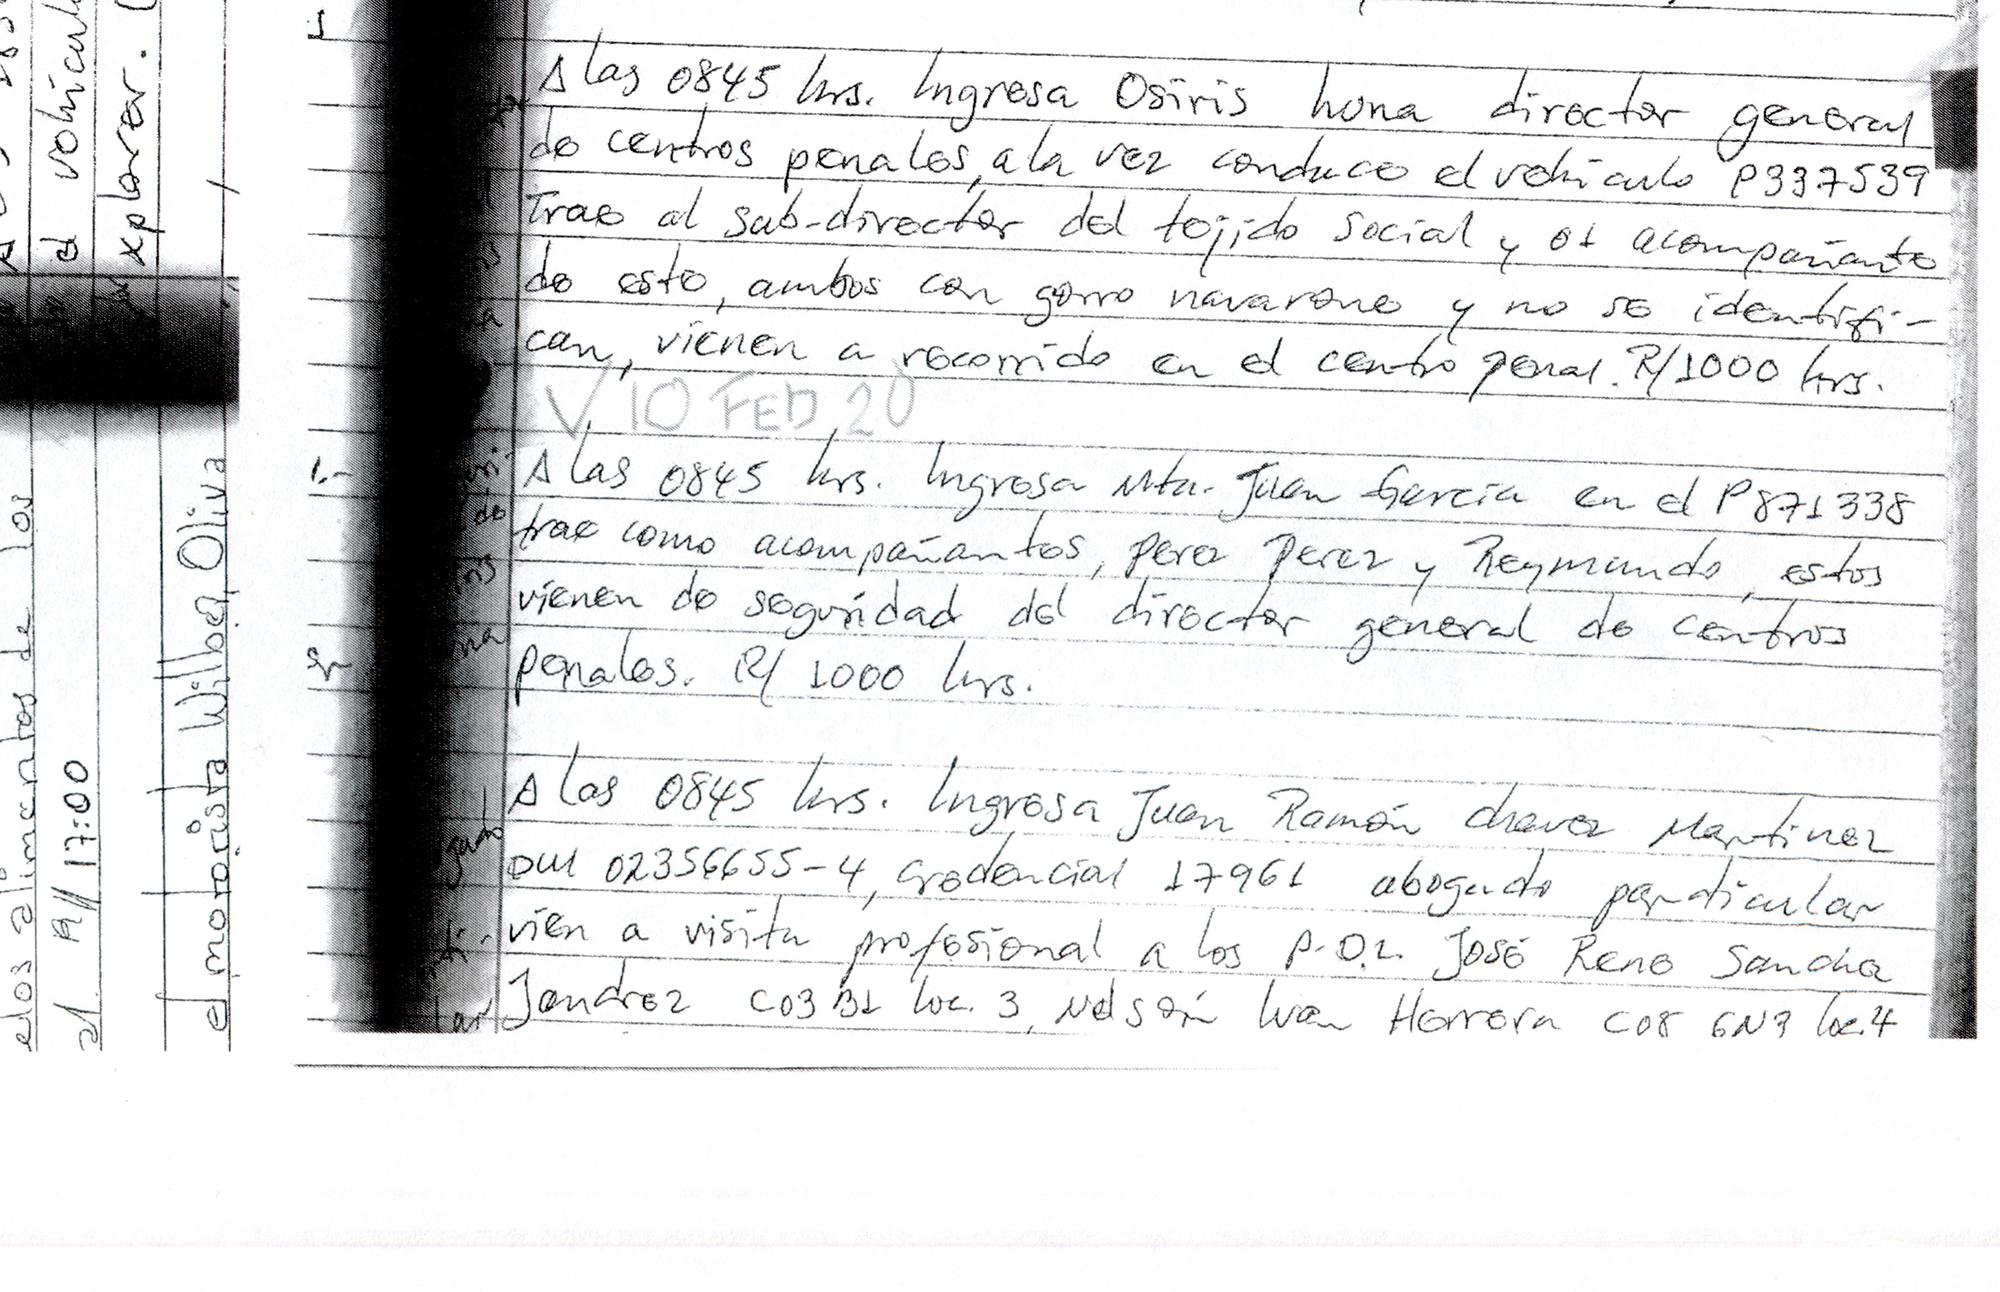 8:45 to 10 am on February 10, 2020 in Zacatecoluca. The deputy director of Tejido Social, Bermúdez, reappeared. Given how the logbook was redacted, it can be inferred that the guard recognized the official despite him wearing a balaclava. A vehicle P337-539 driven by Luna entered the premises at 8:45 am carrying “the deputy director of Tejido Social and another individual, both wearing balaclavas and refusing to identify themselves. They came to do a tour of the facility.”